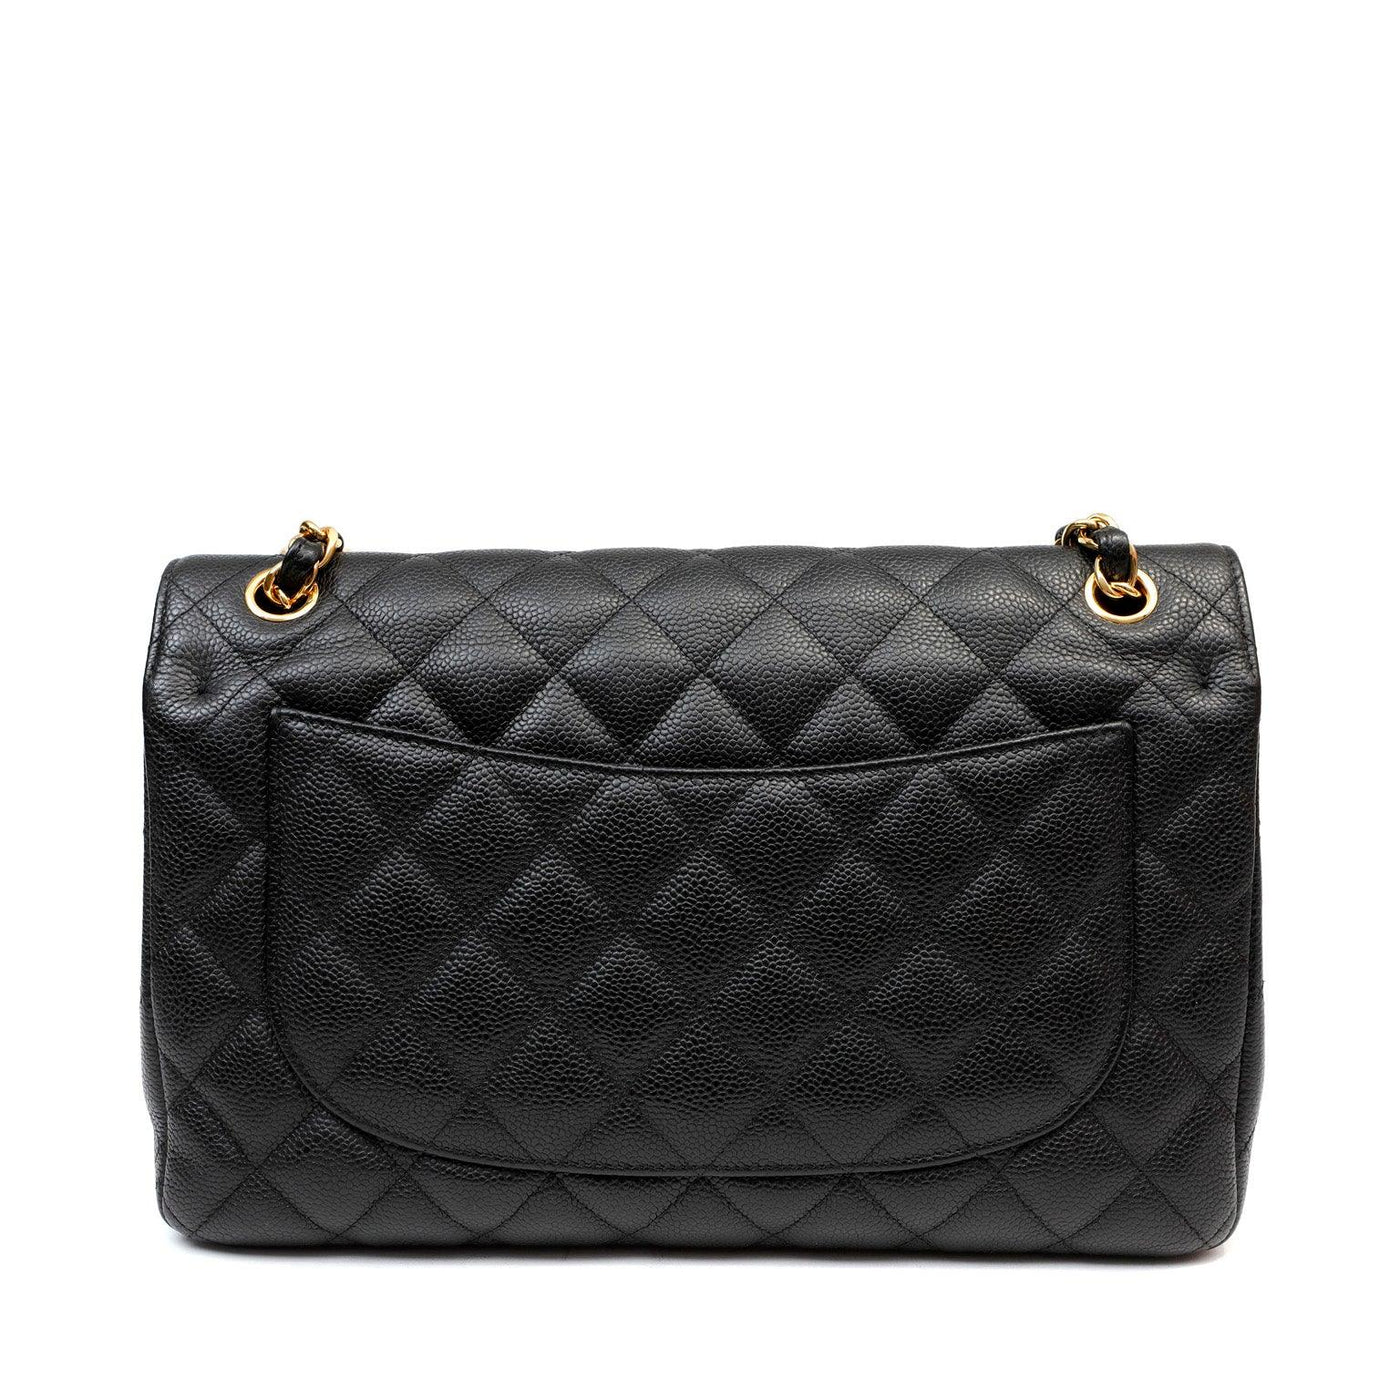 Chanel Black Caviar Jumbo Classic with Gold Hardware - Only Authentics